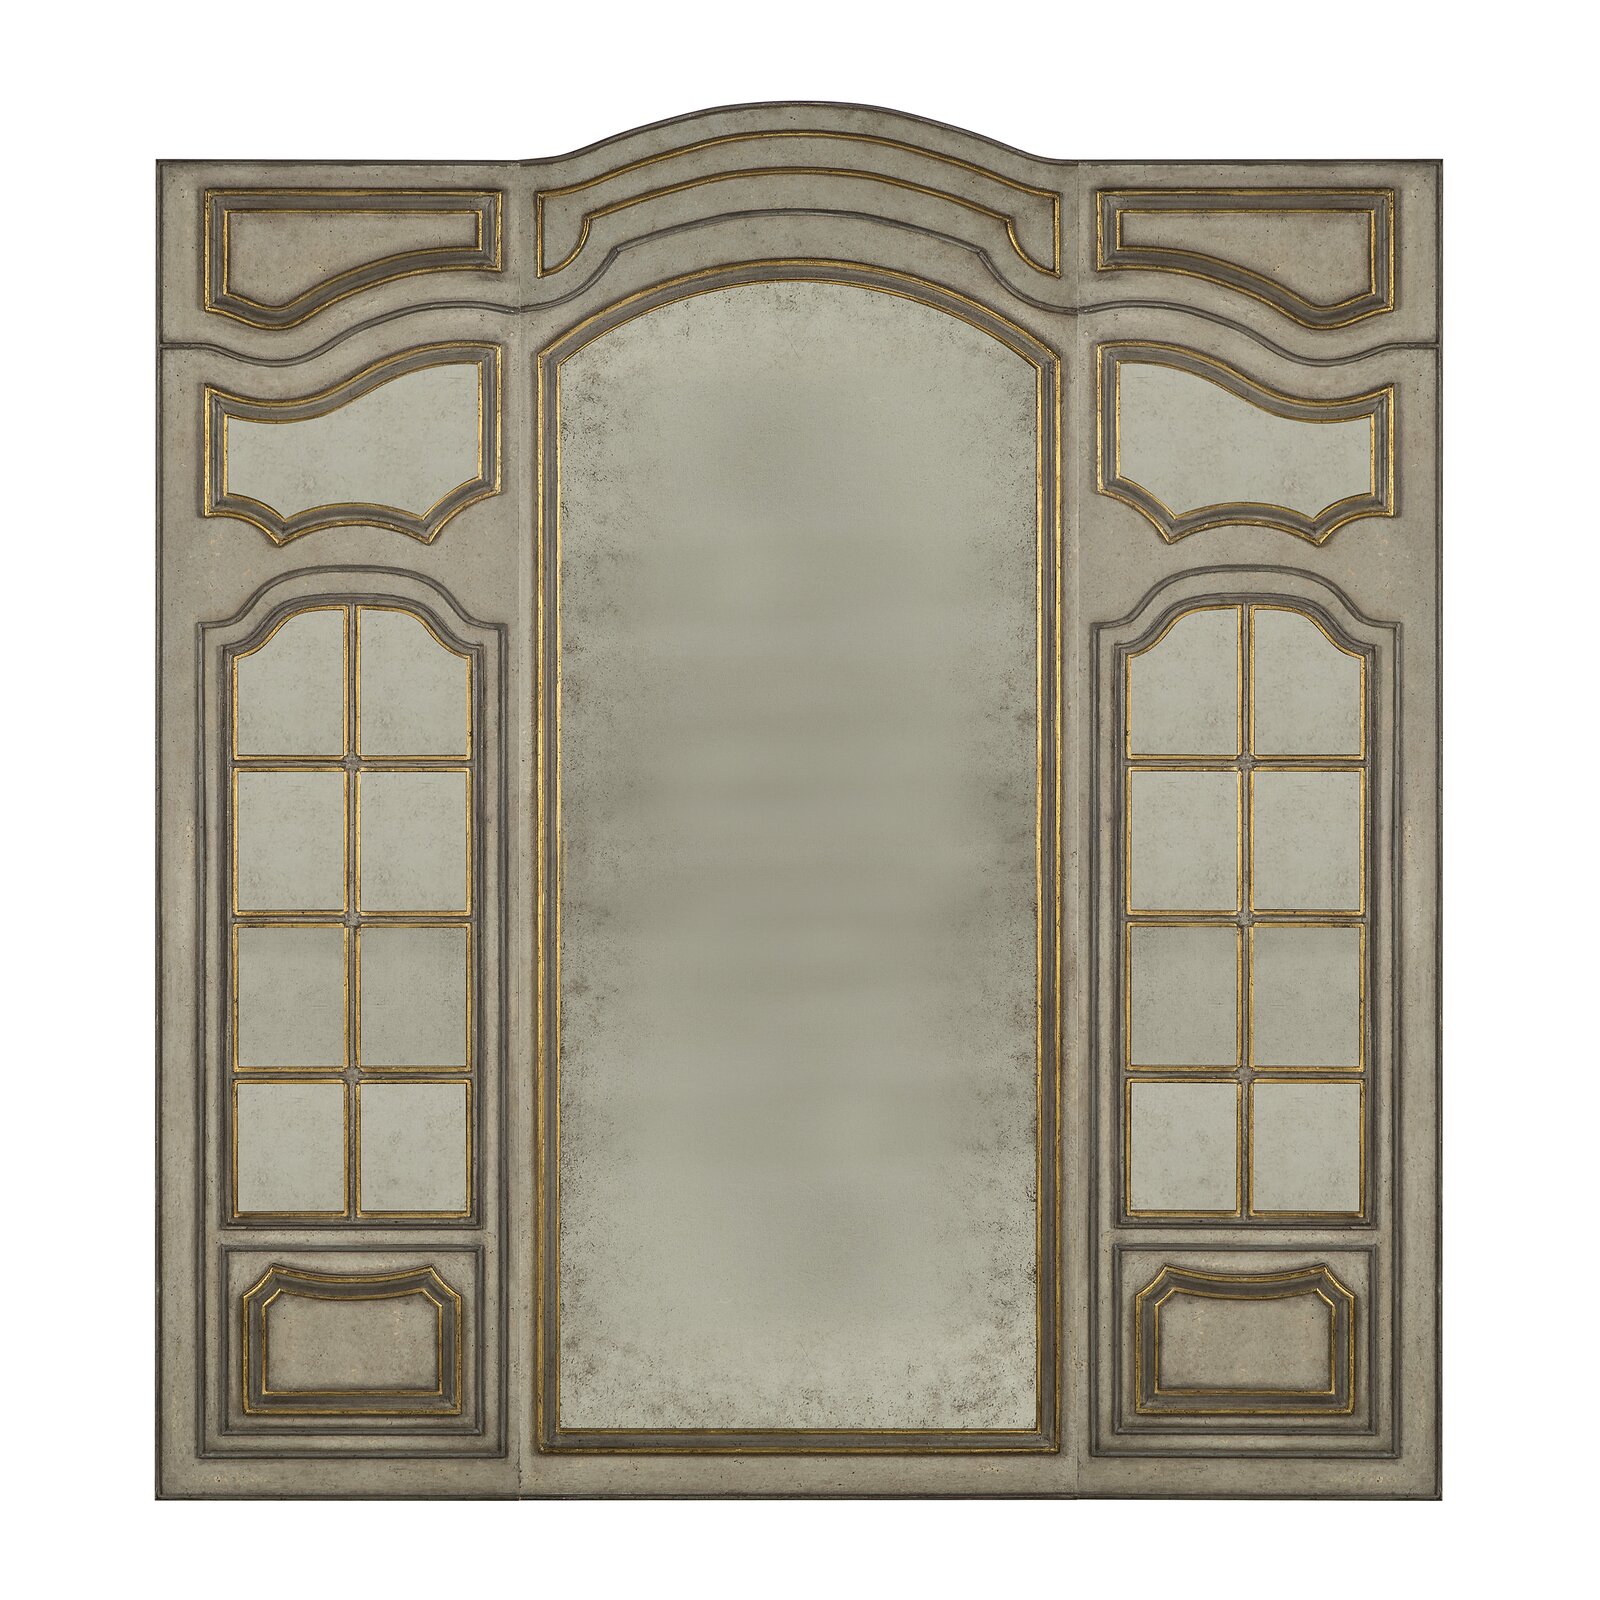 Glass Wall Mirrors - Denby Rustic Venetian Distressed Accent Mirror